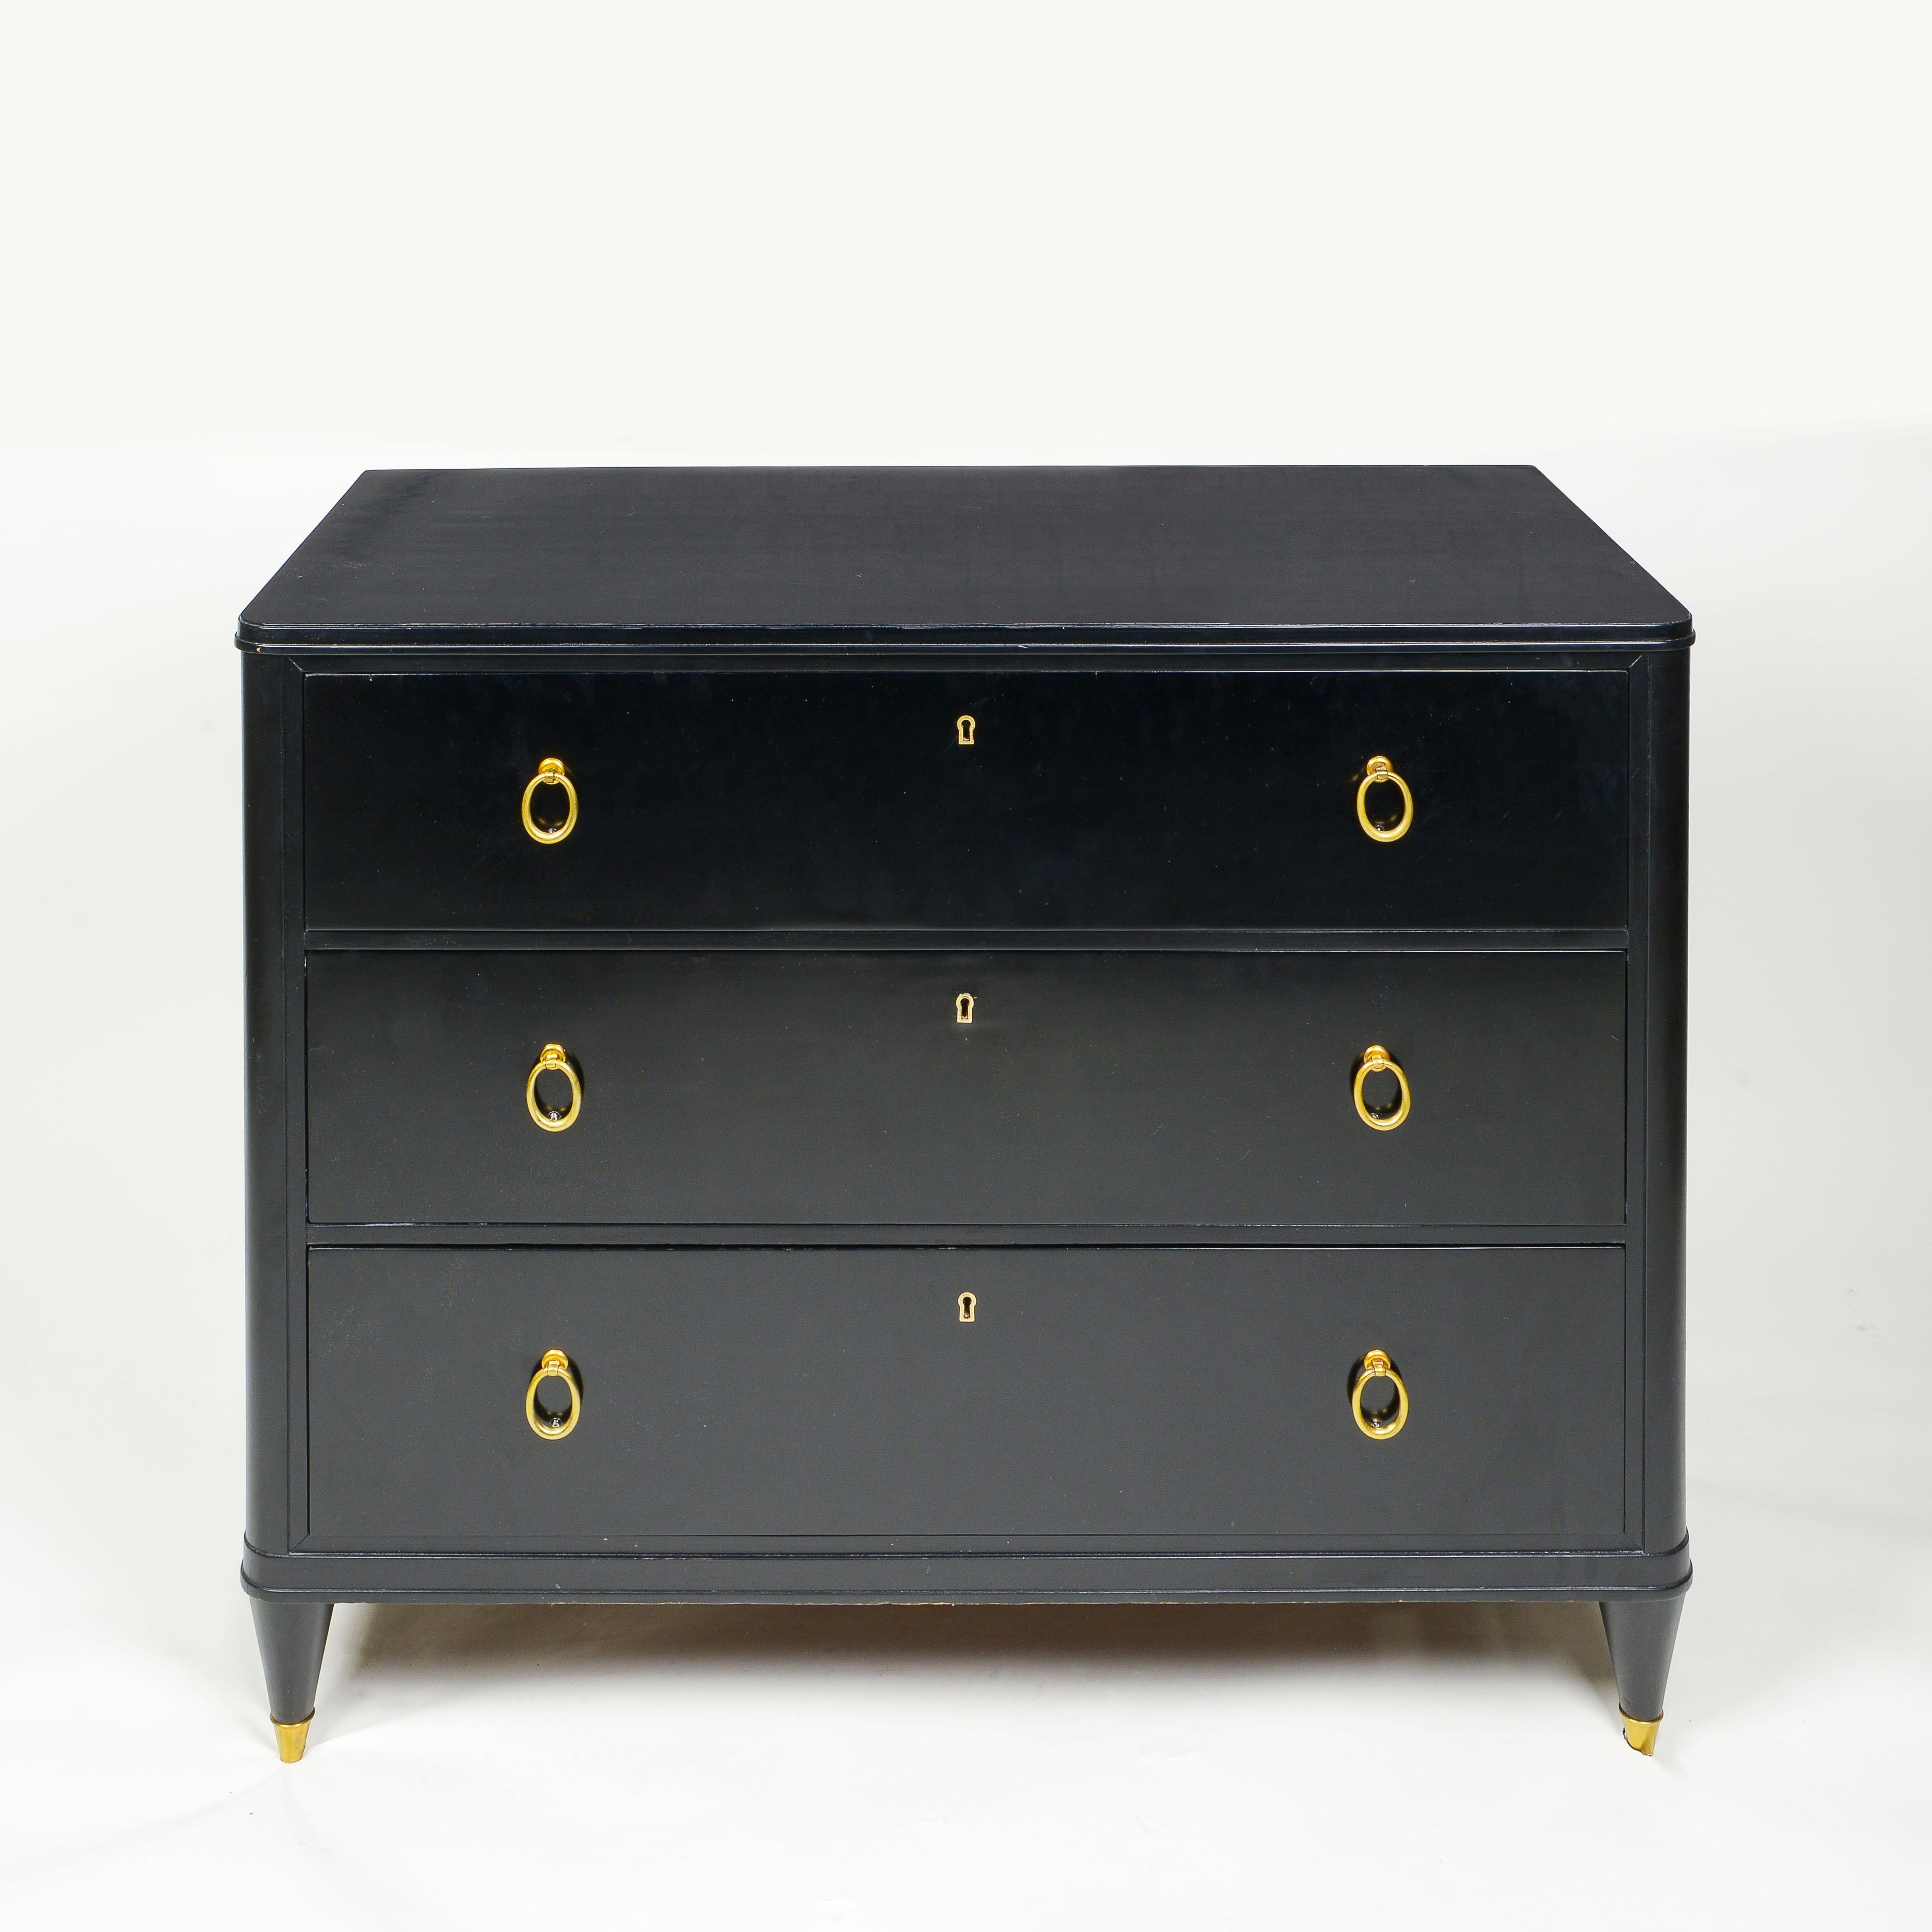 Fitted with three drawers on four tapered brass feet. Each drawer features a brass-outlined escutcheon and ring pulls. Bearing Nordiska Kompaniet label.